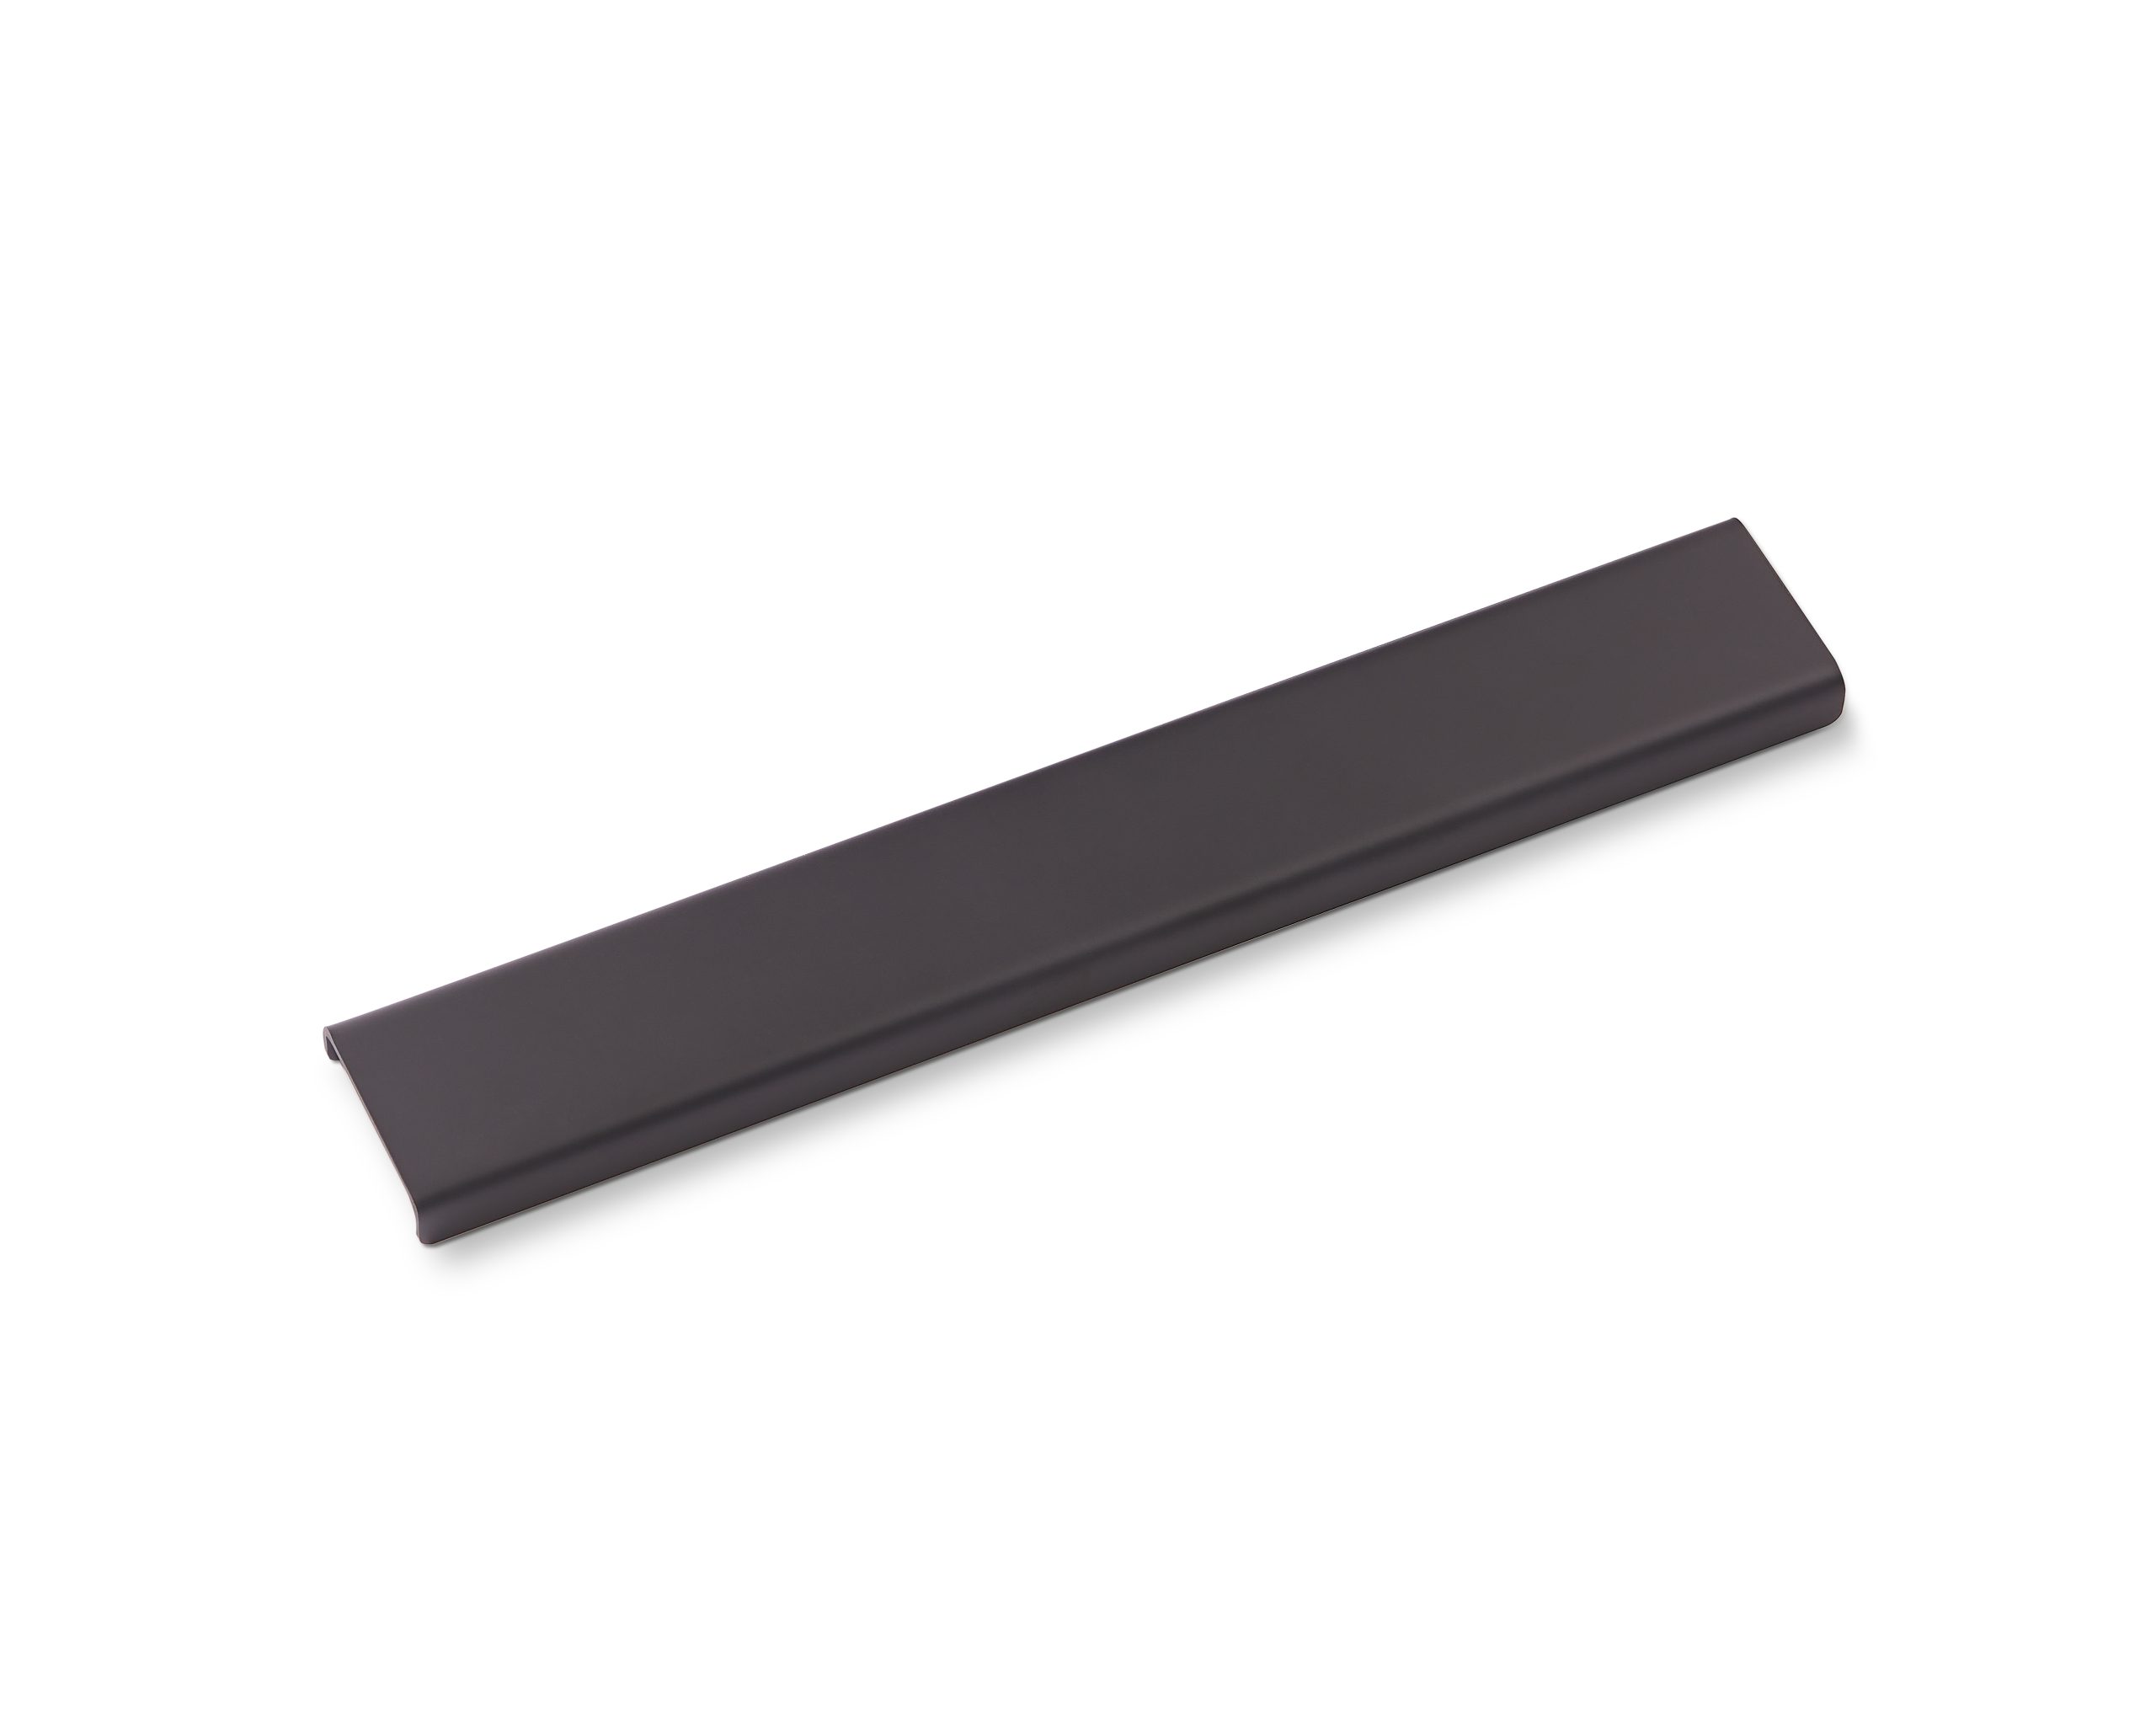 https://wedicorp.com/wp-content/uploads/2022/09/Wedi-Products-Matt-Black-Linear-Cover-scaled.jpg